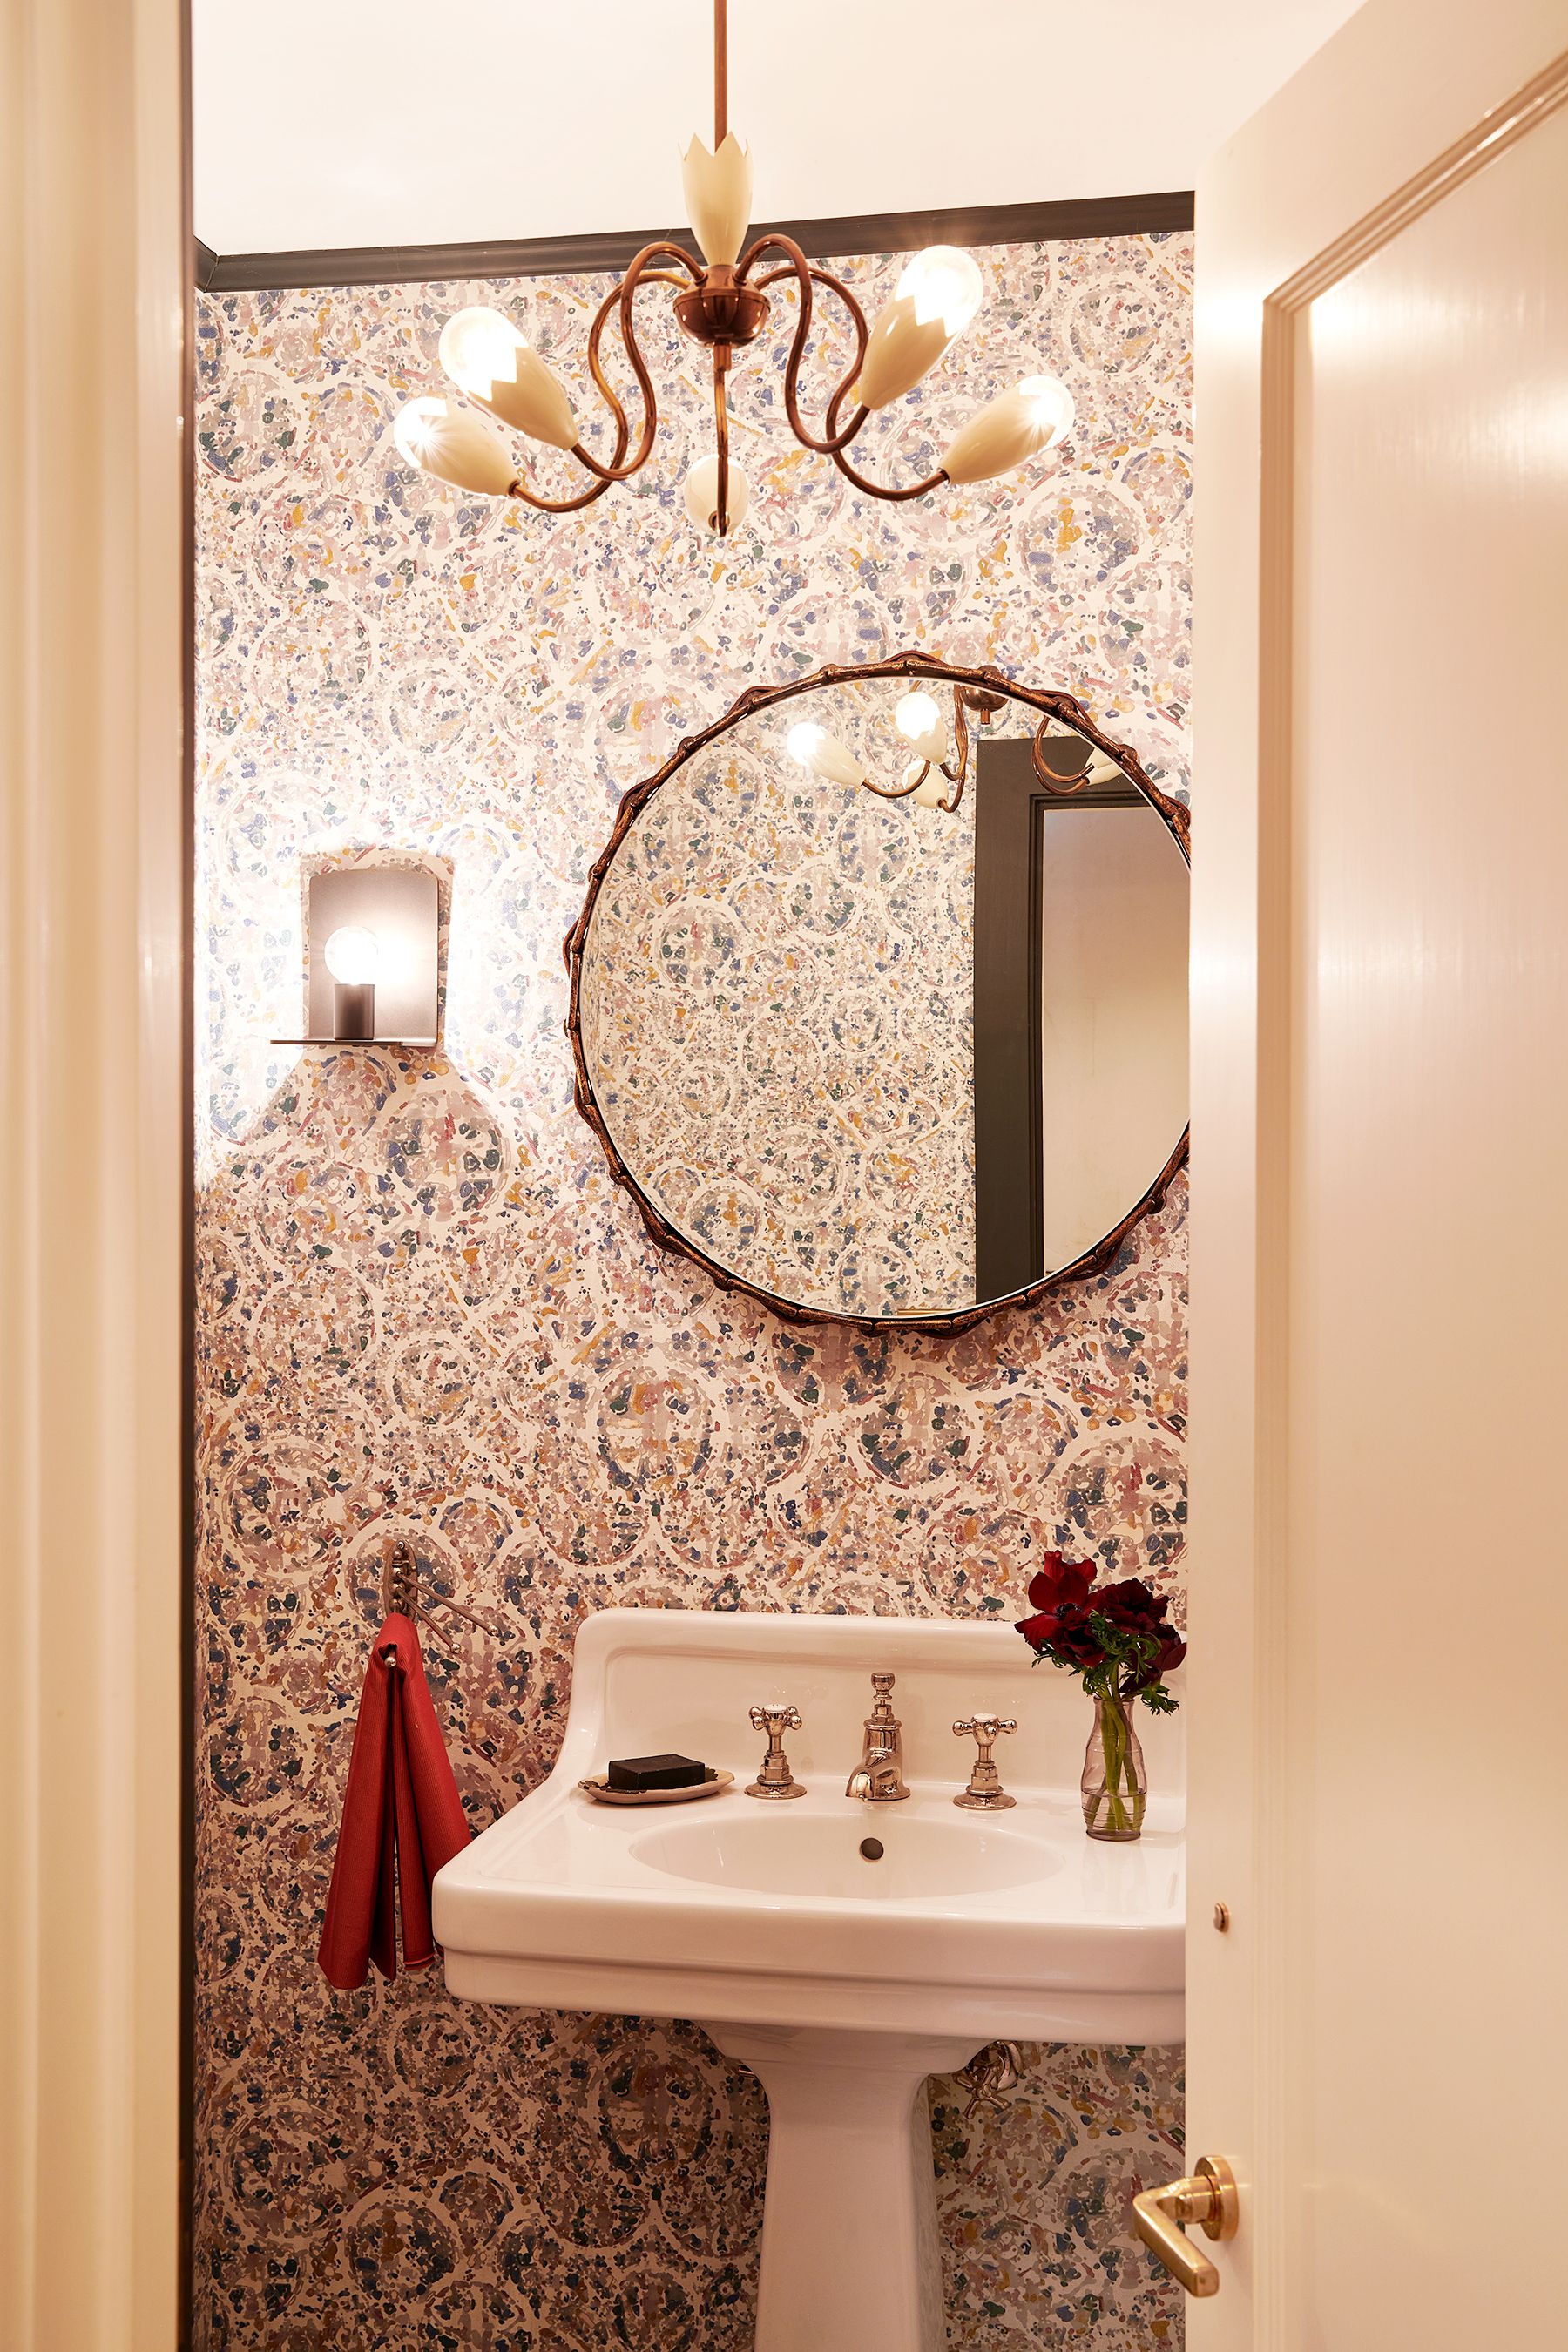 18 Small Bathroom Ideas 18   Remodeling, Decor & Design Solutions